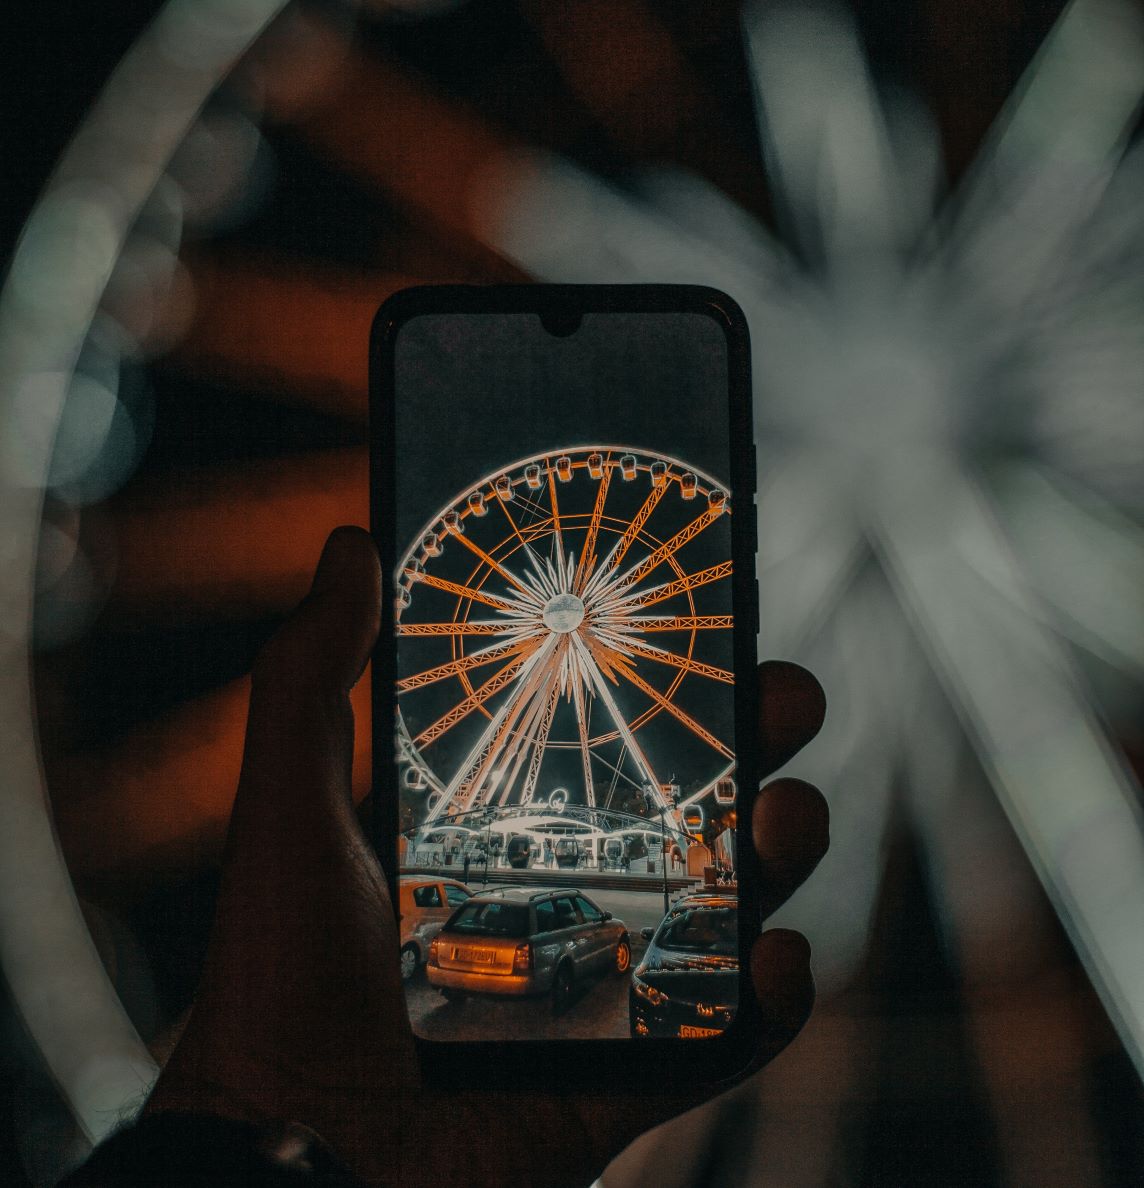 Theme parks & Wifi: 8 points to optimize operations and customer experience